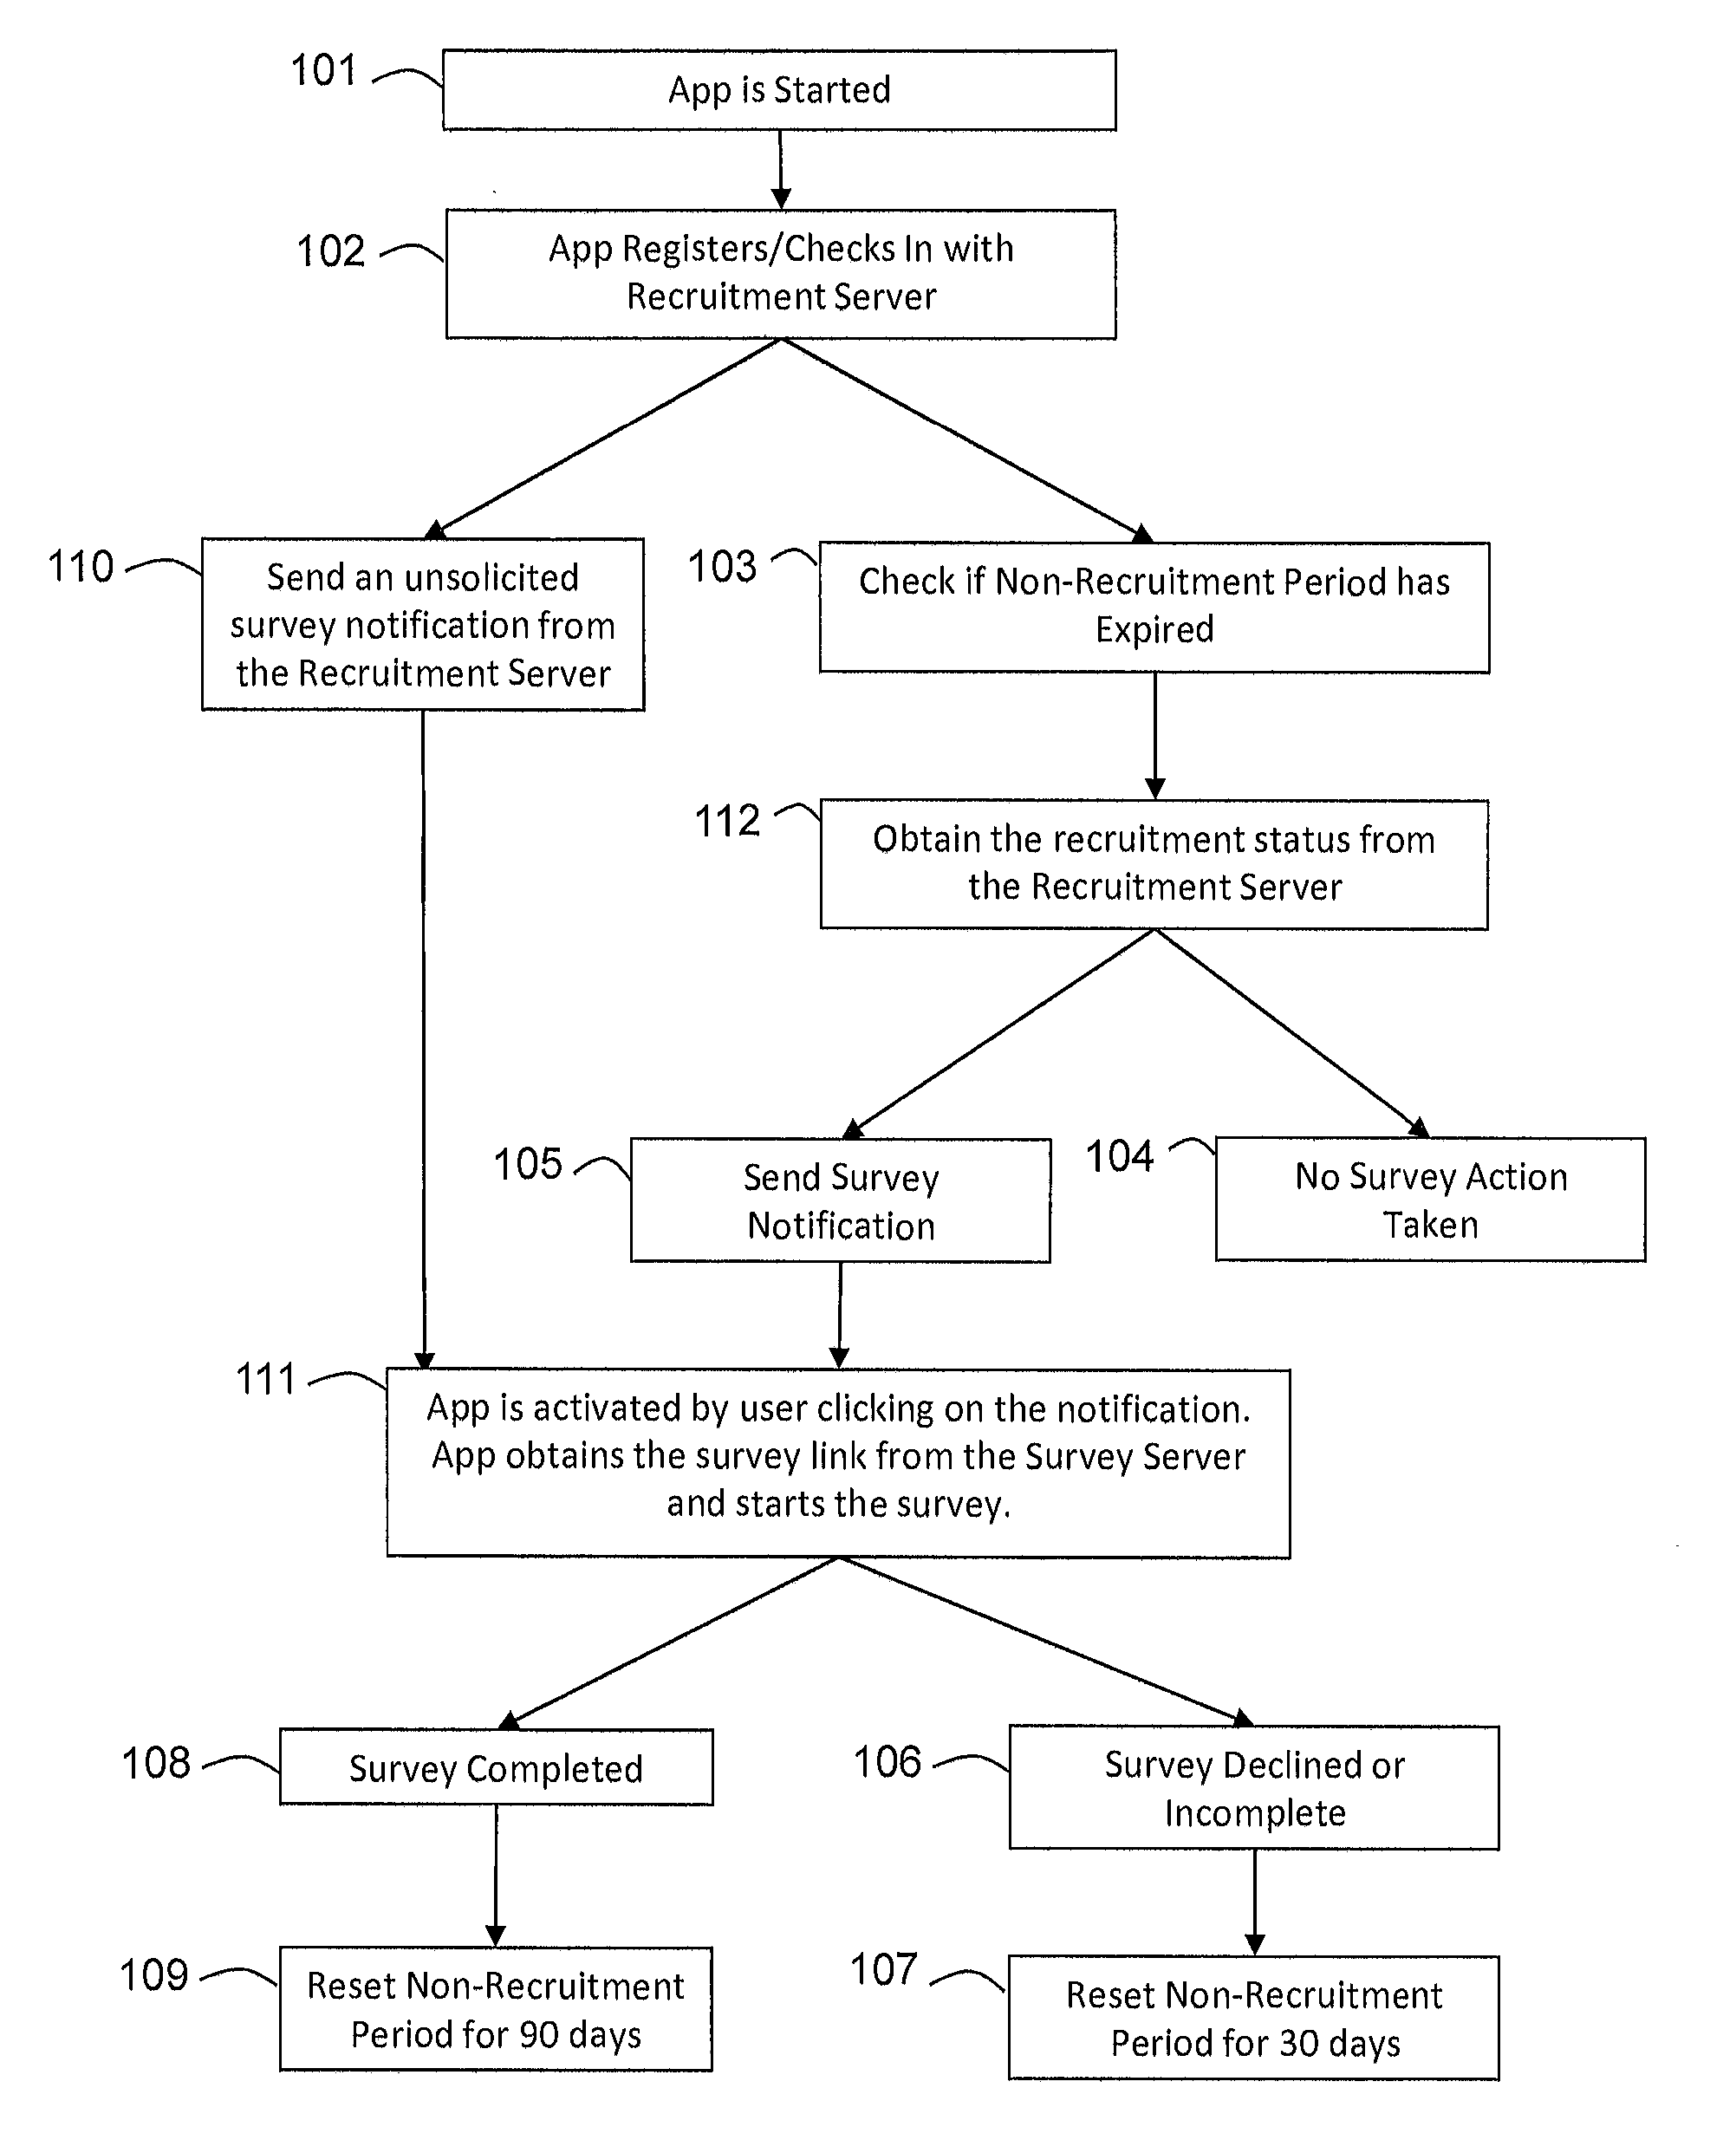 System and method for recruiting mobile app users to participate in surveys